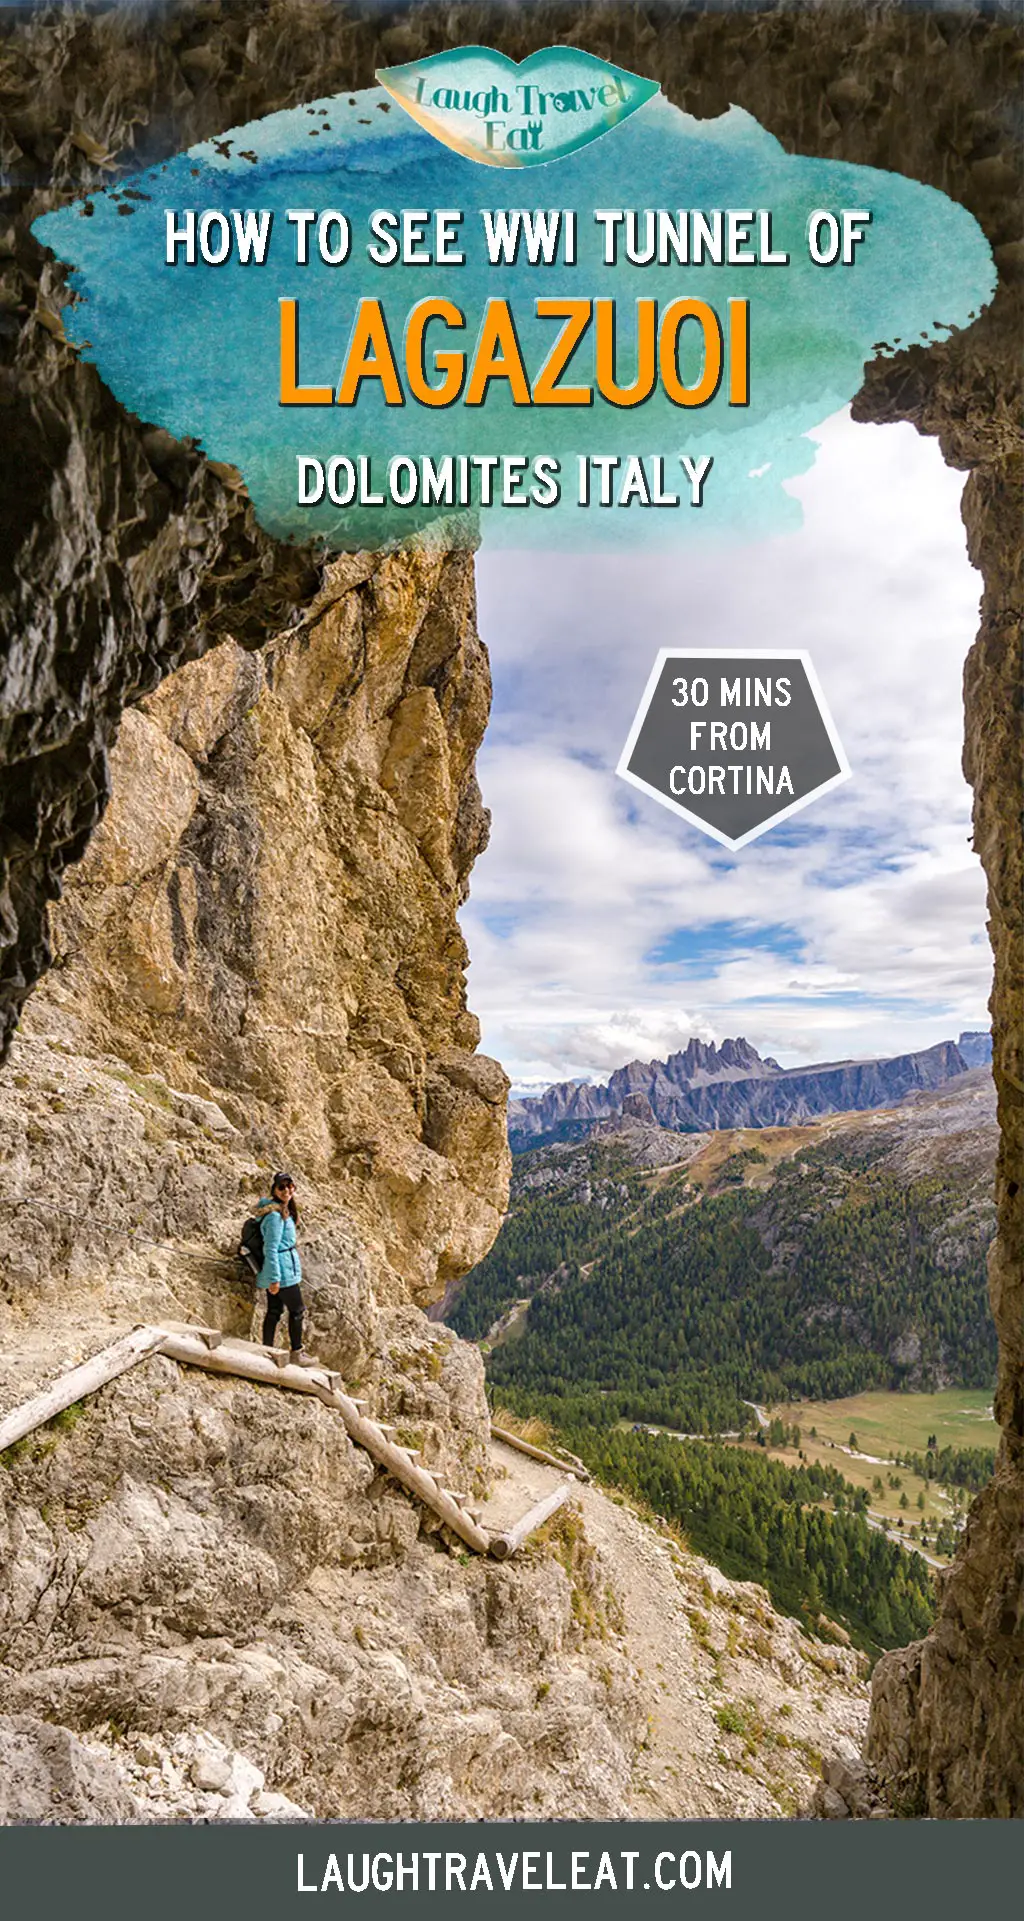 The Lagazuoi is one of the best day hikes from Cortina d’Ampezzo in the Italian Dolomites. While the view is undeniably spectacular, it is more famous for its historical significance during WWI. Here’s how to do a day hike there: #dolomite #italy #lagazuoi #hike